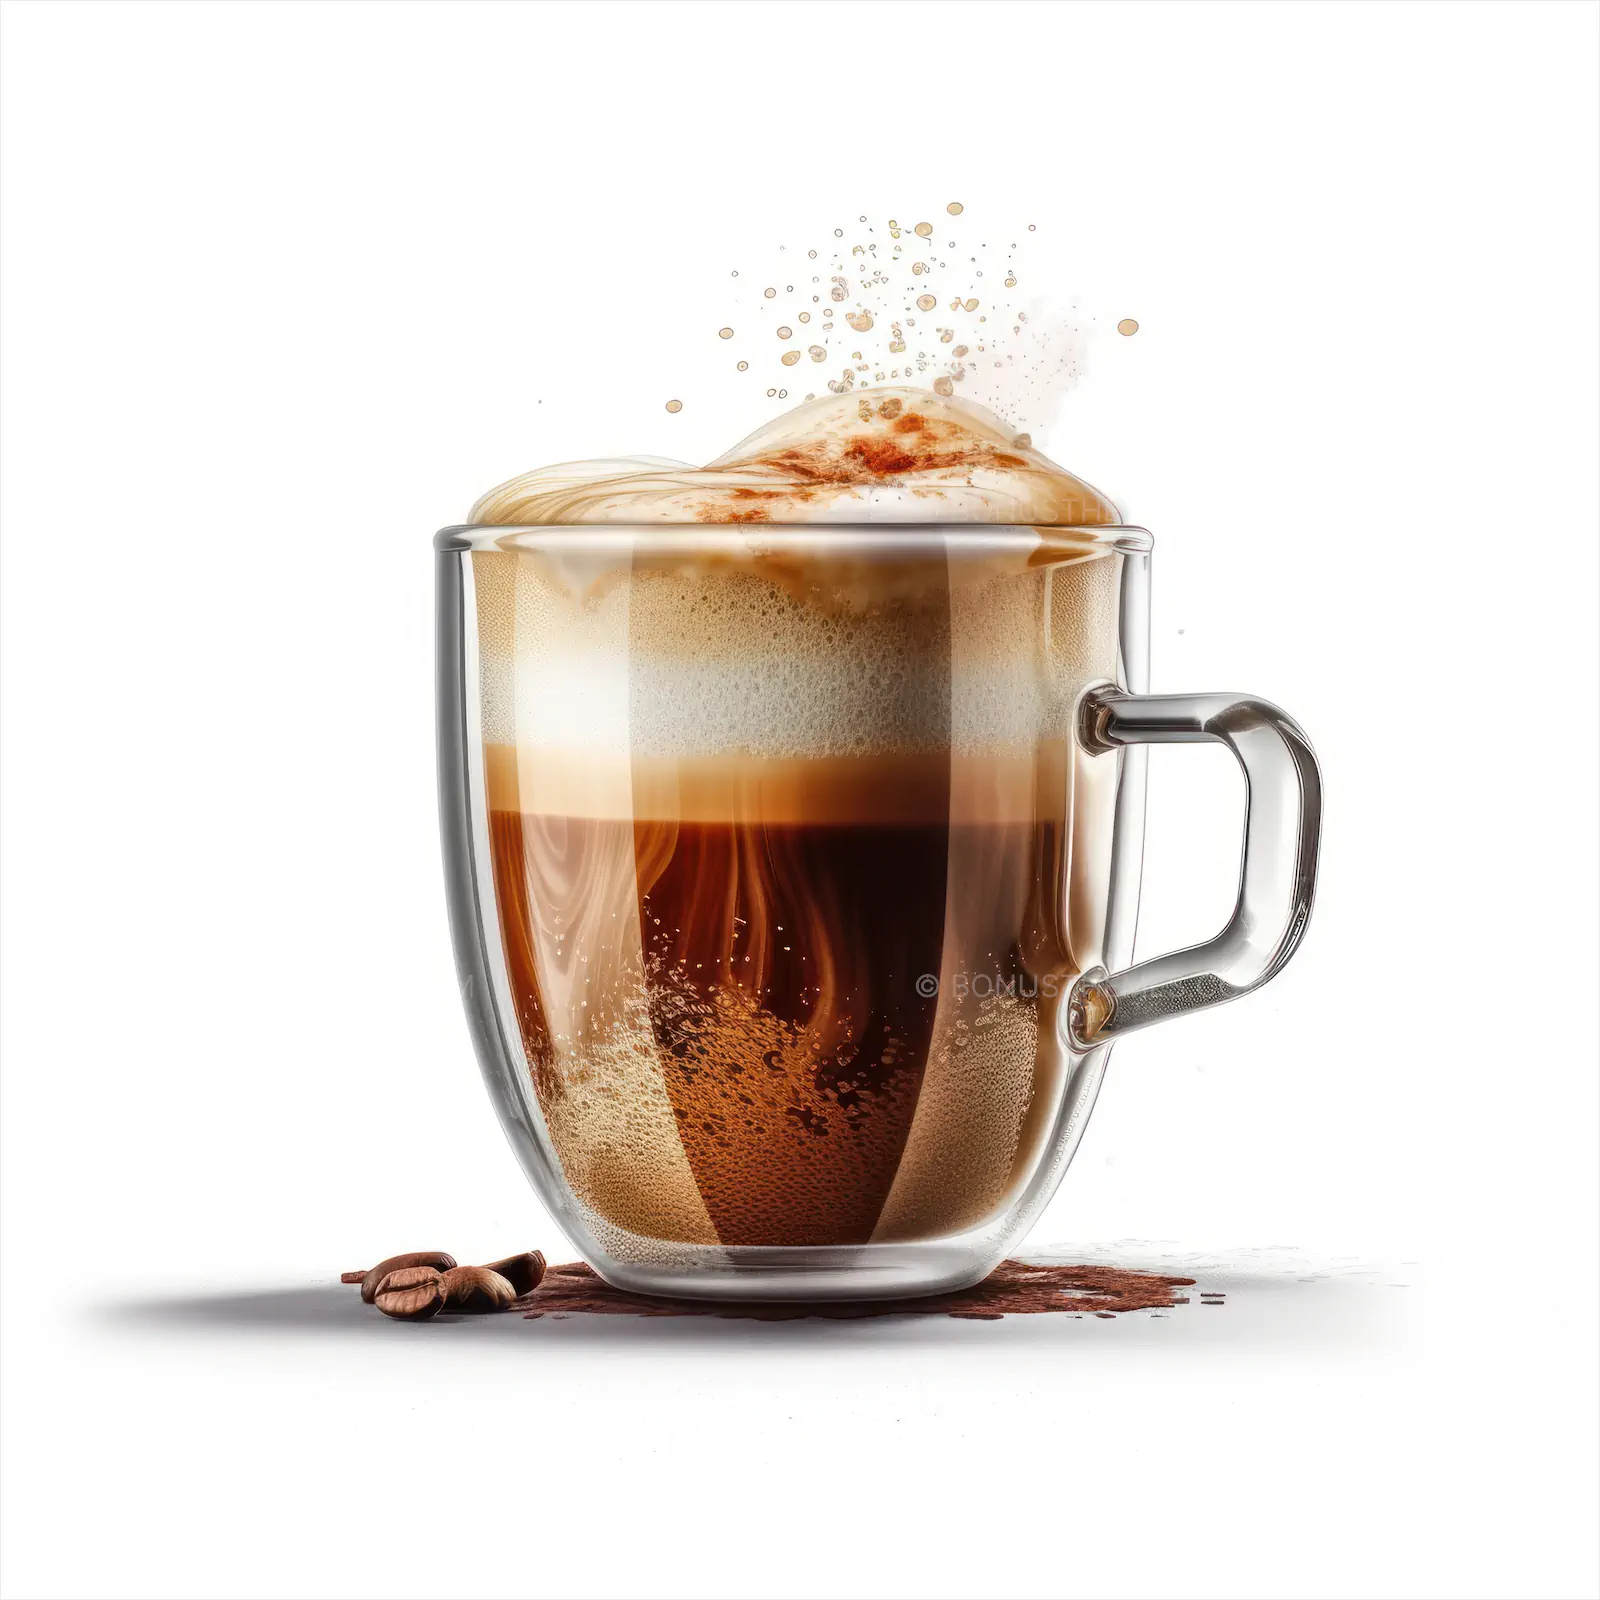 A glass cup of latte coffee on isolated white background